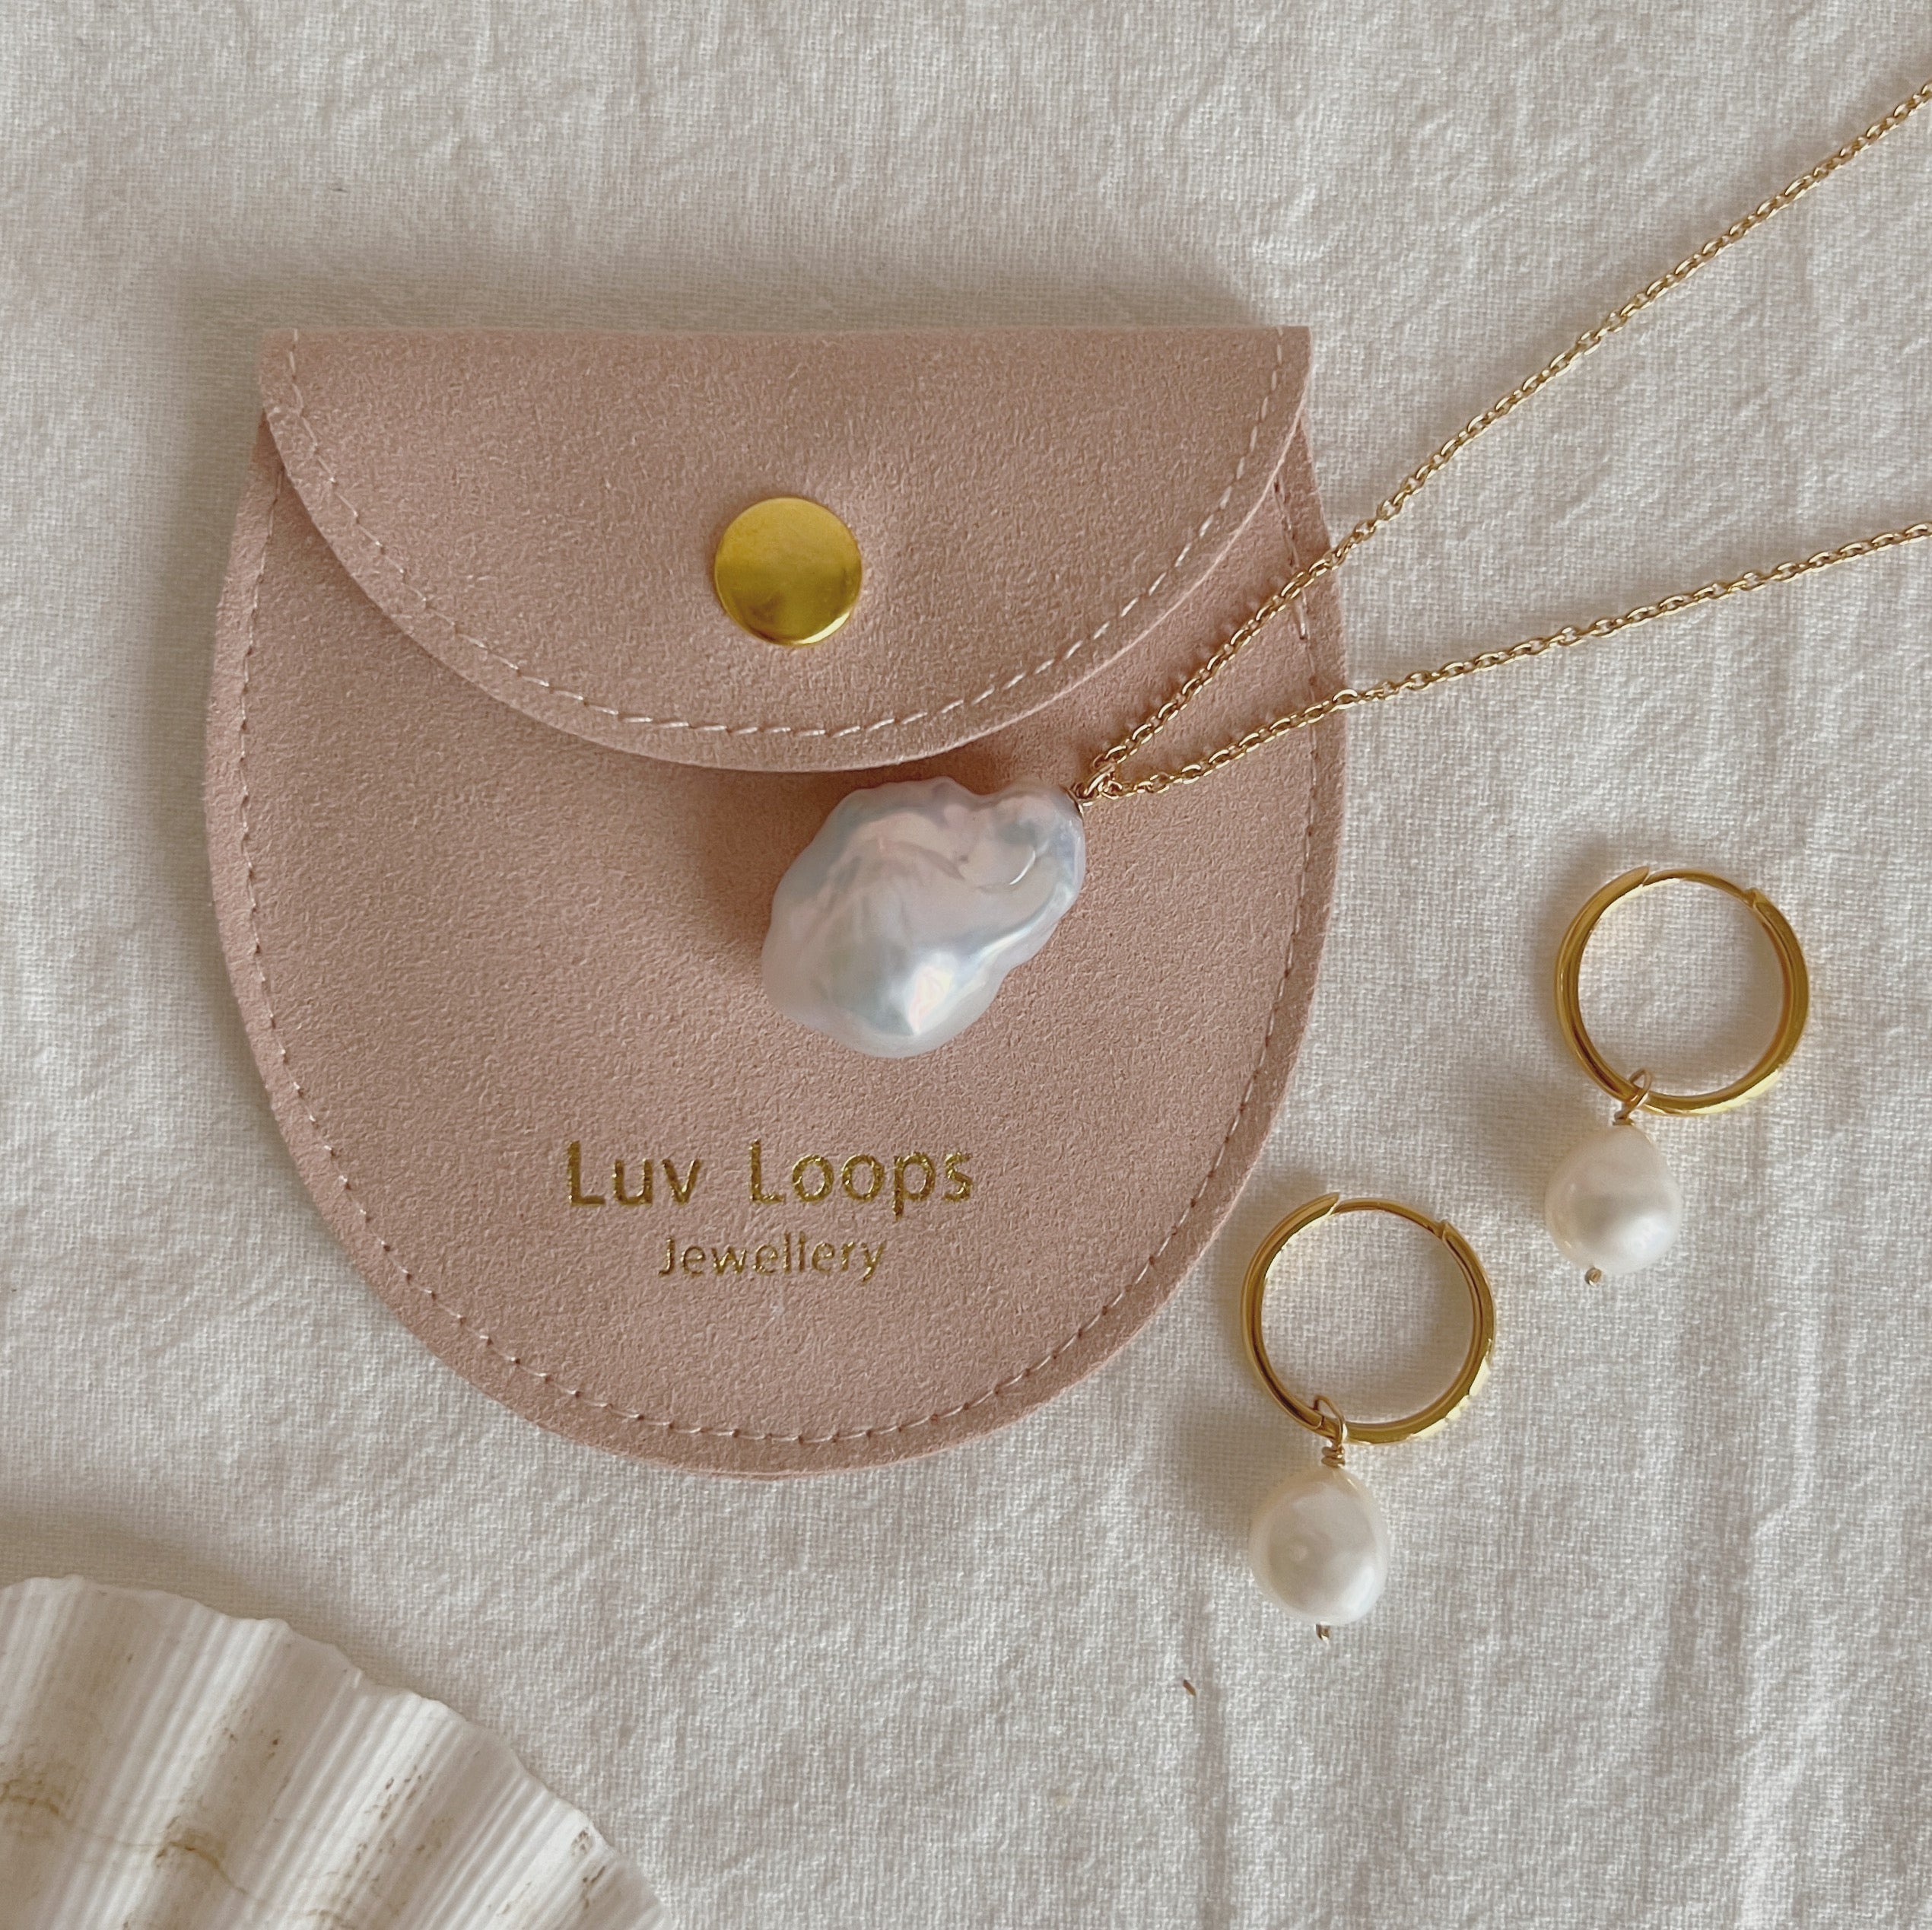 Jewellery pouch and sustainable packaging